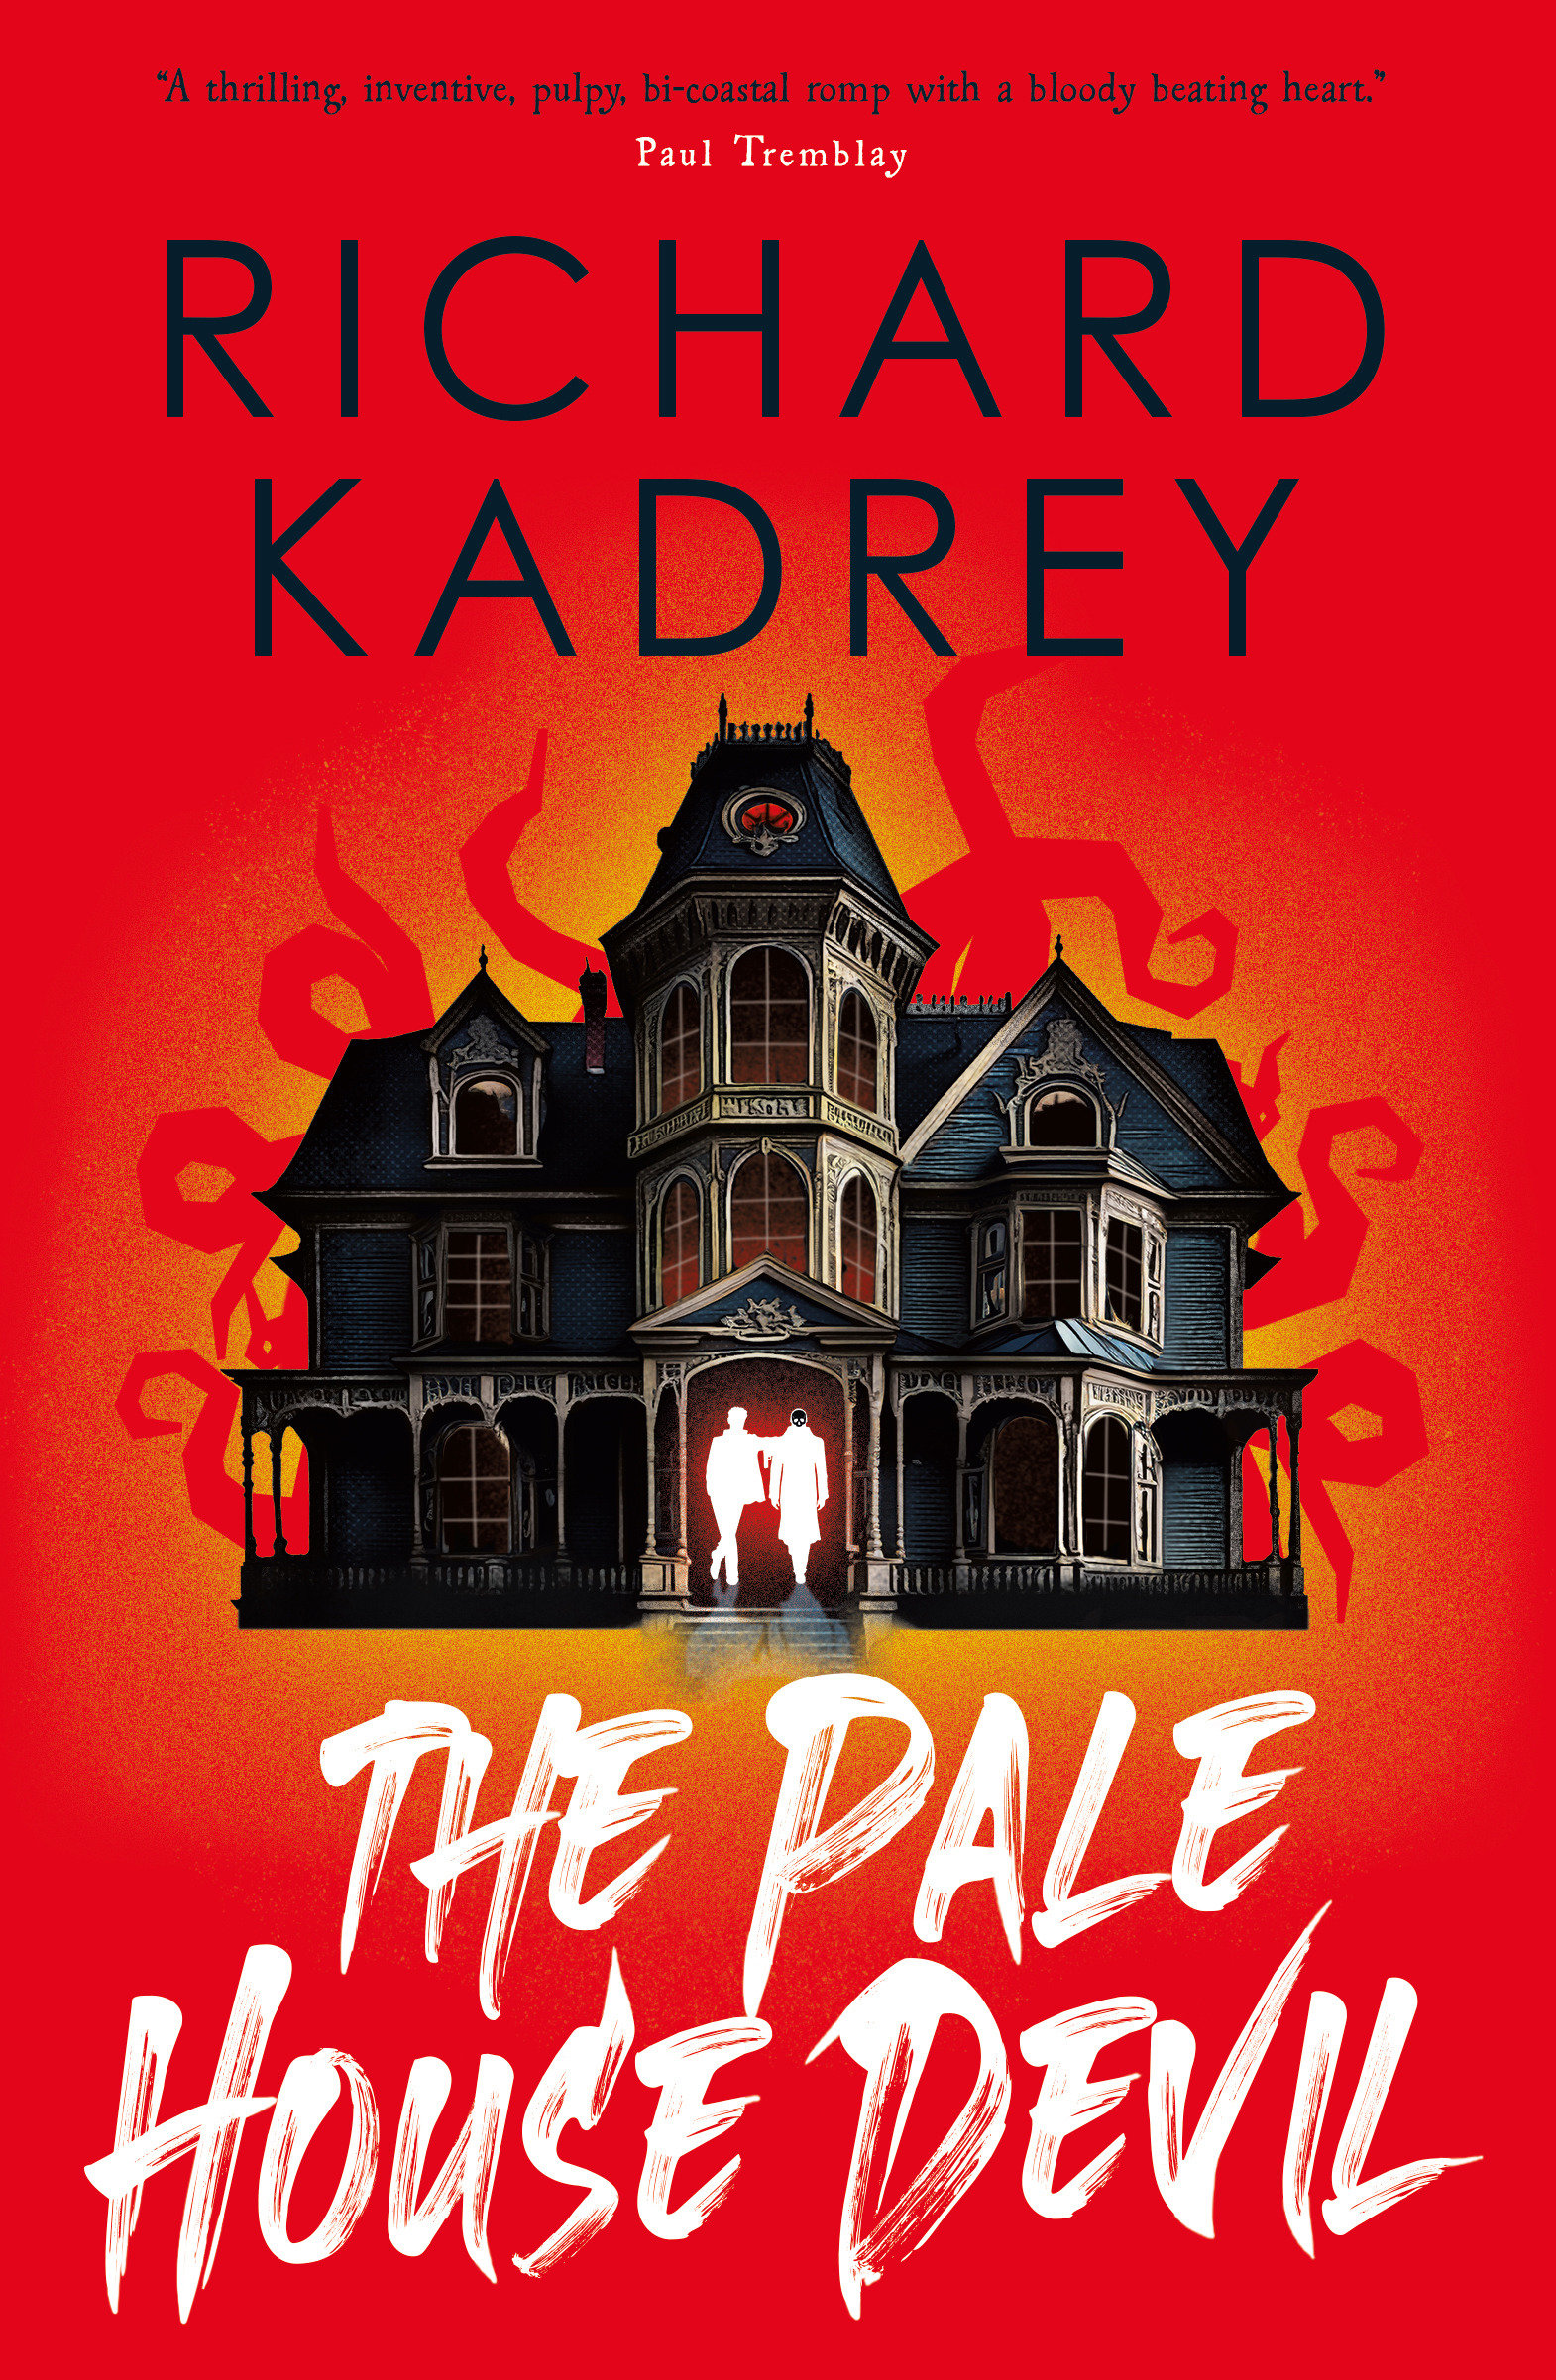 The Pale House Devil (Hardcover Book)